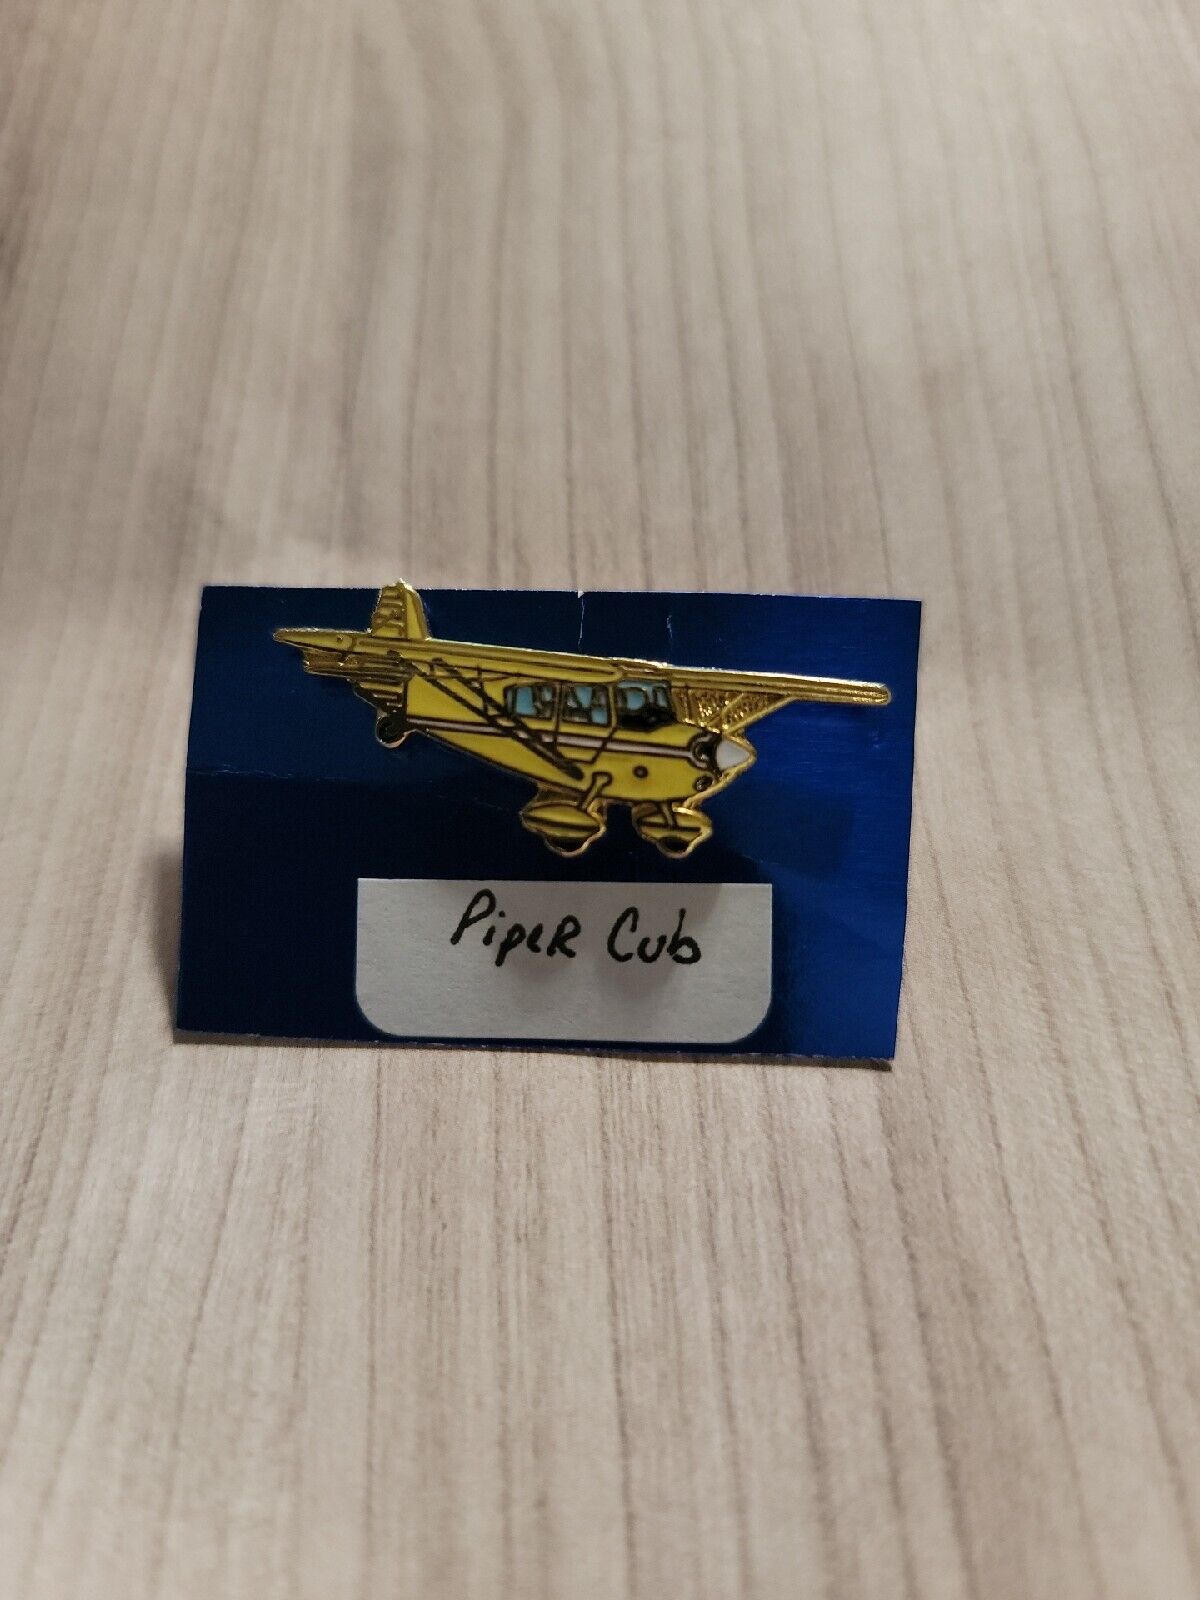 PIPER CUB HAT LAPEL PIN UP PILOT CREW SOLO GIFT WING AIRPLANE L@@K 